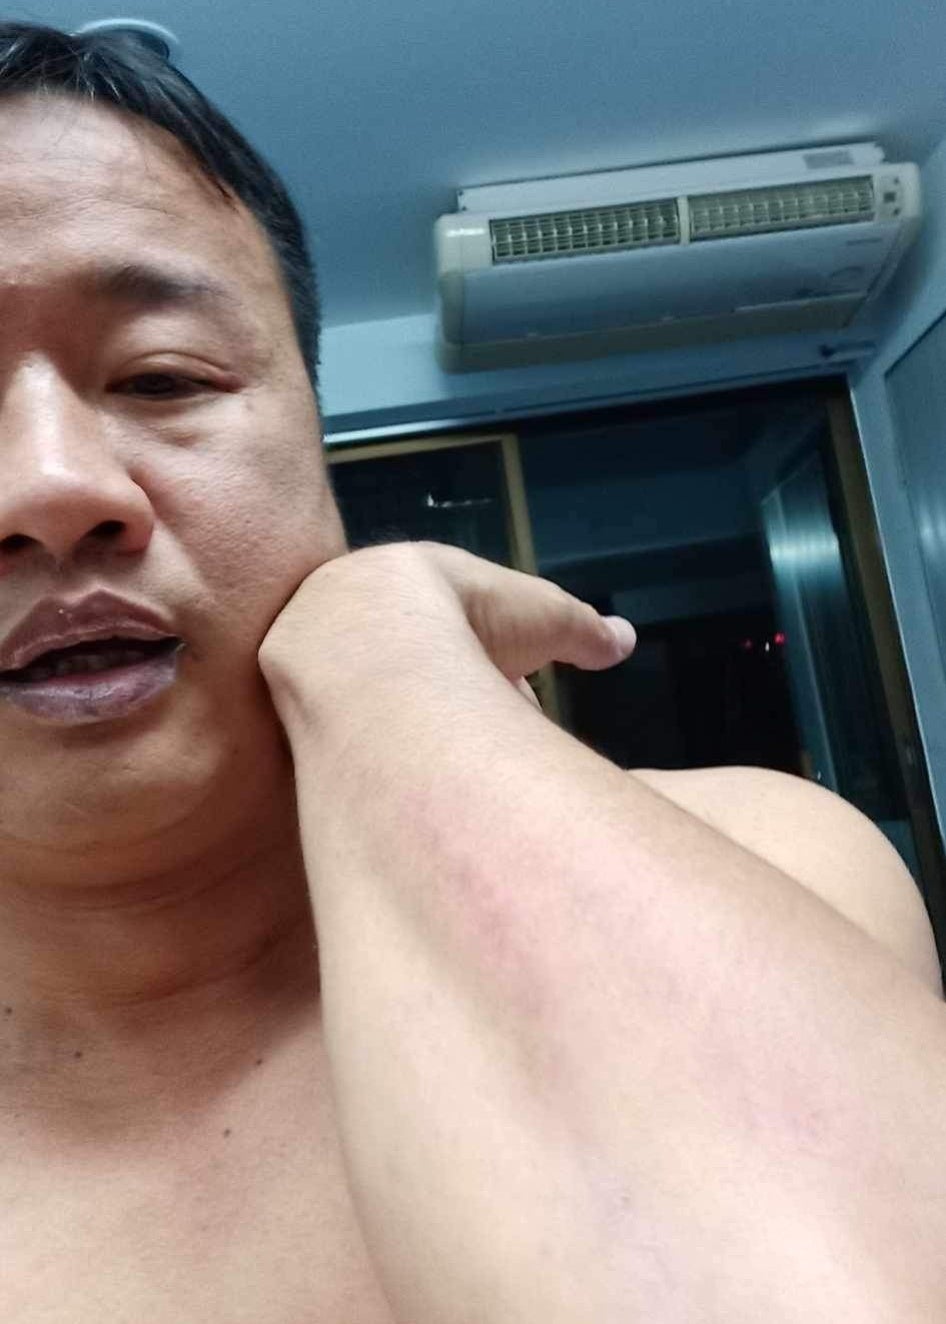 Opposition Cambodian activist Chamroeun Suon displays injuries he sustained after two assailants attacked him in Bangkok, Thailand on December 22, 2019.